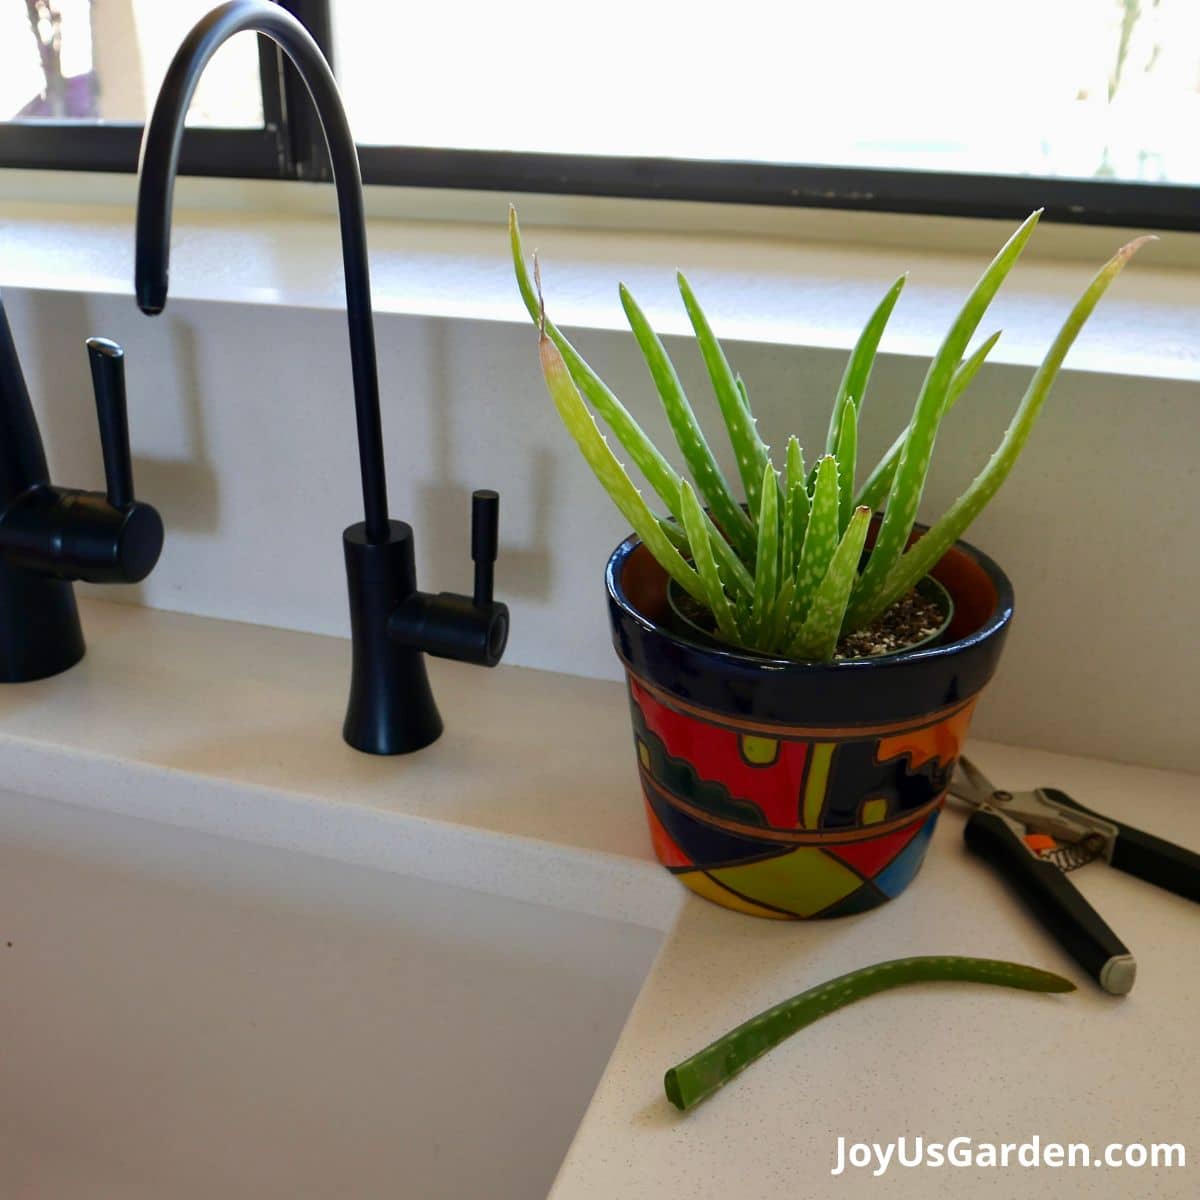 aloe vera growing on kitchen counter in talavera pot, pruned leaf and pruners on counter next to pot